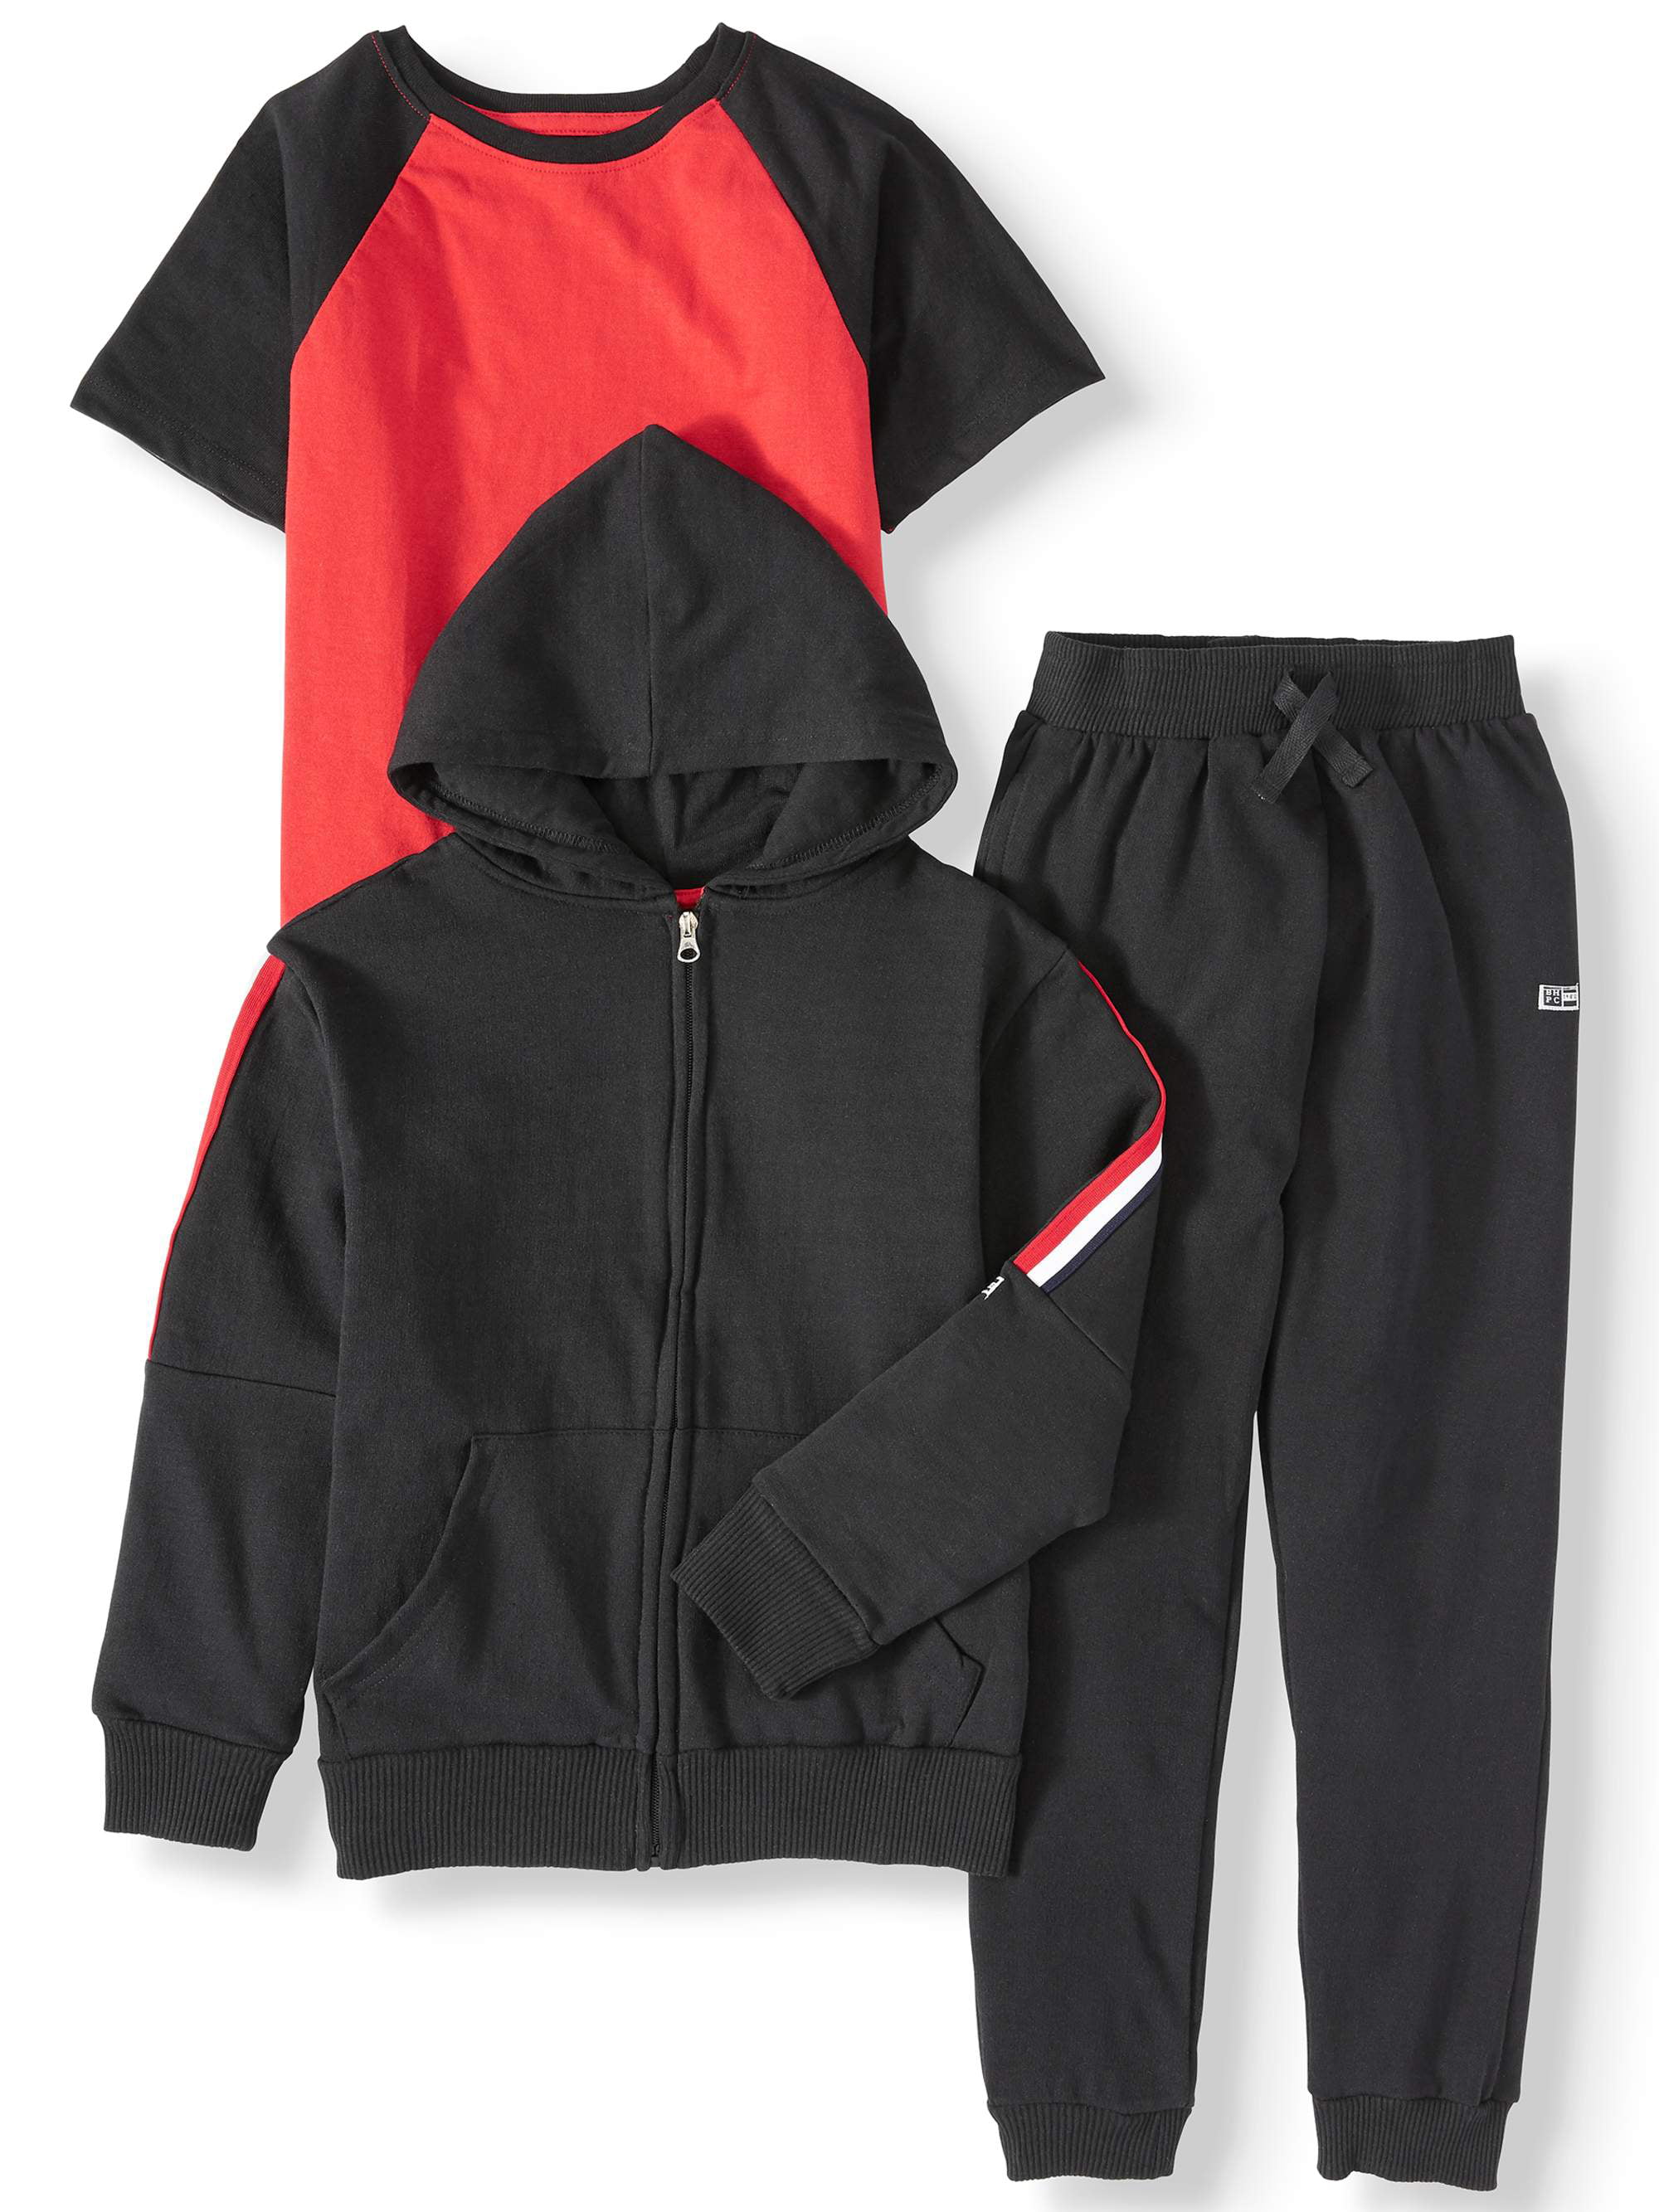 polo hoodie outfit